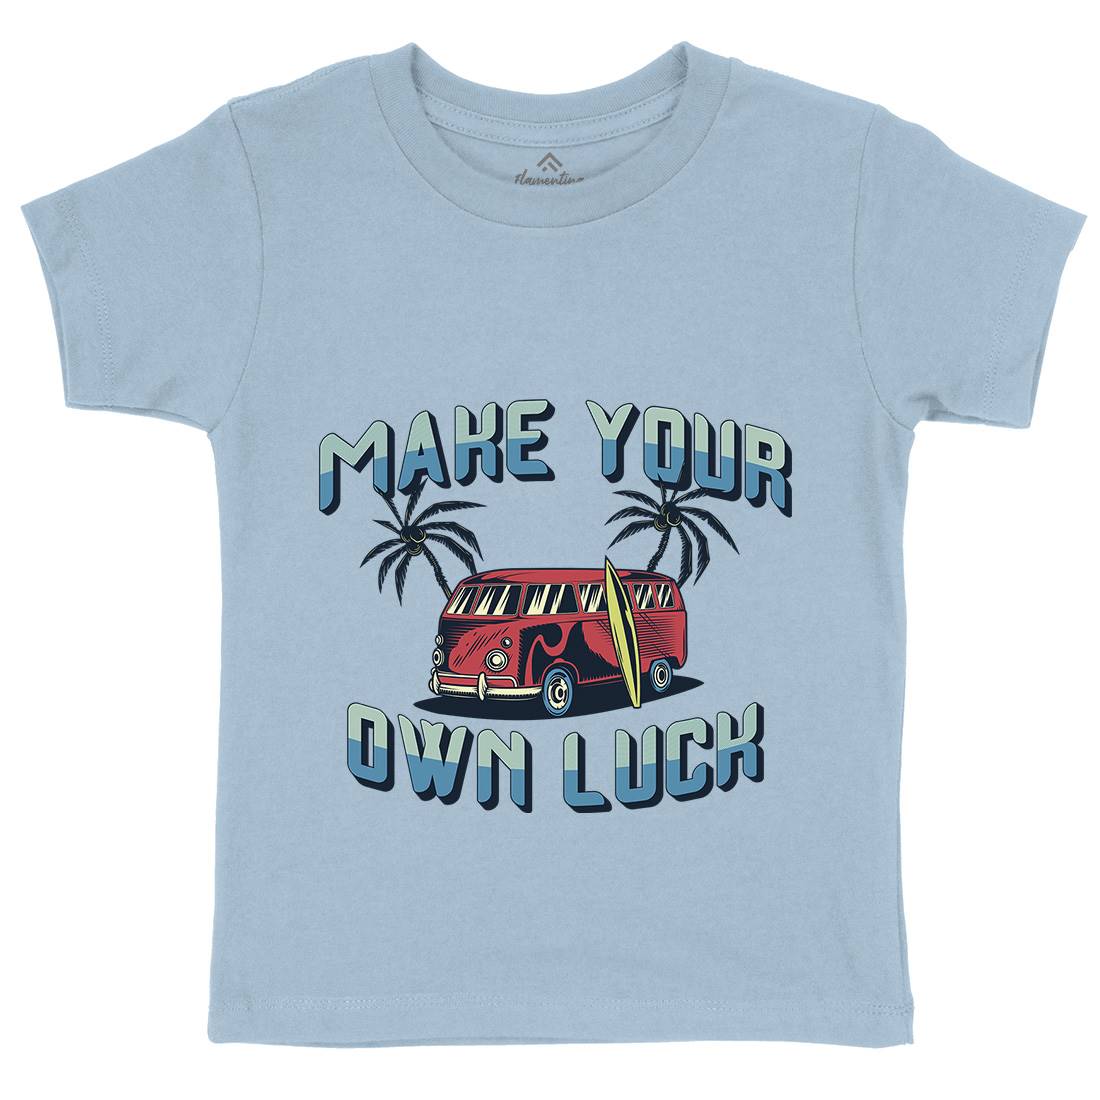 Make Your Own Luck Kids Crew Neck T-Shirt Nature B307